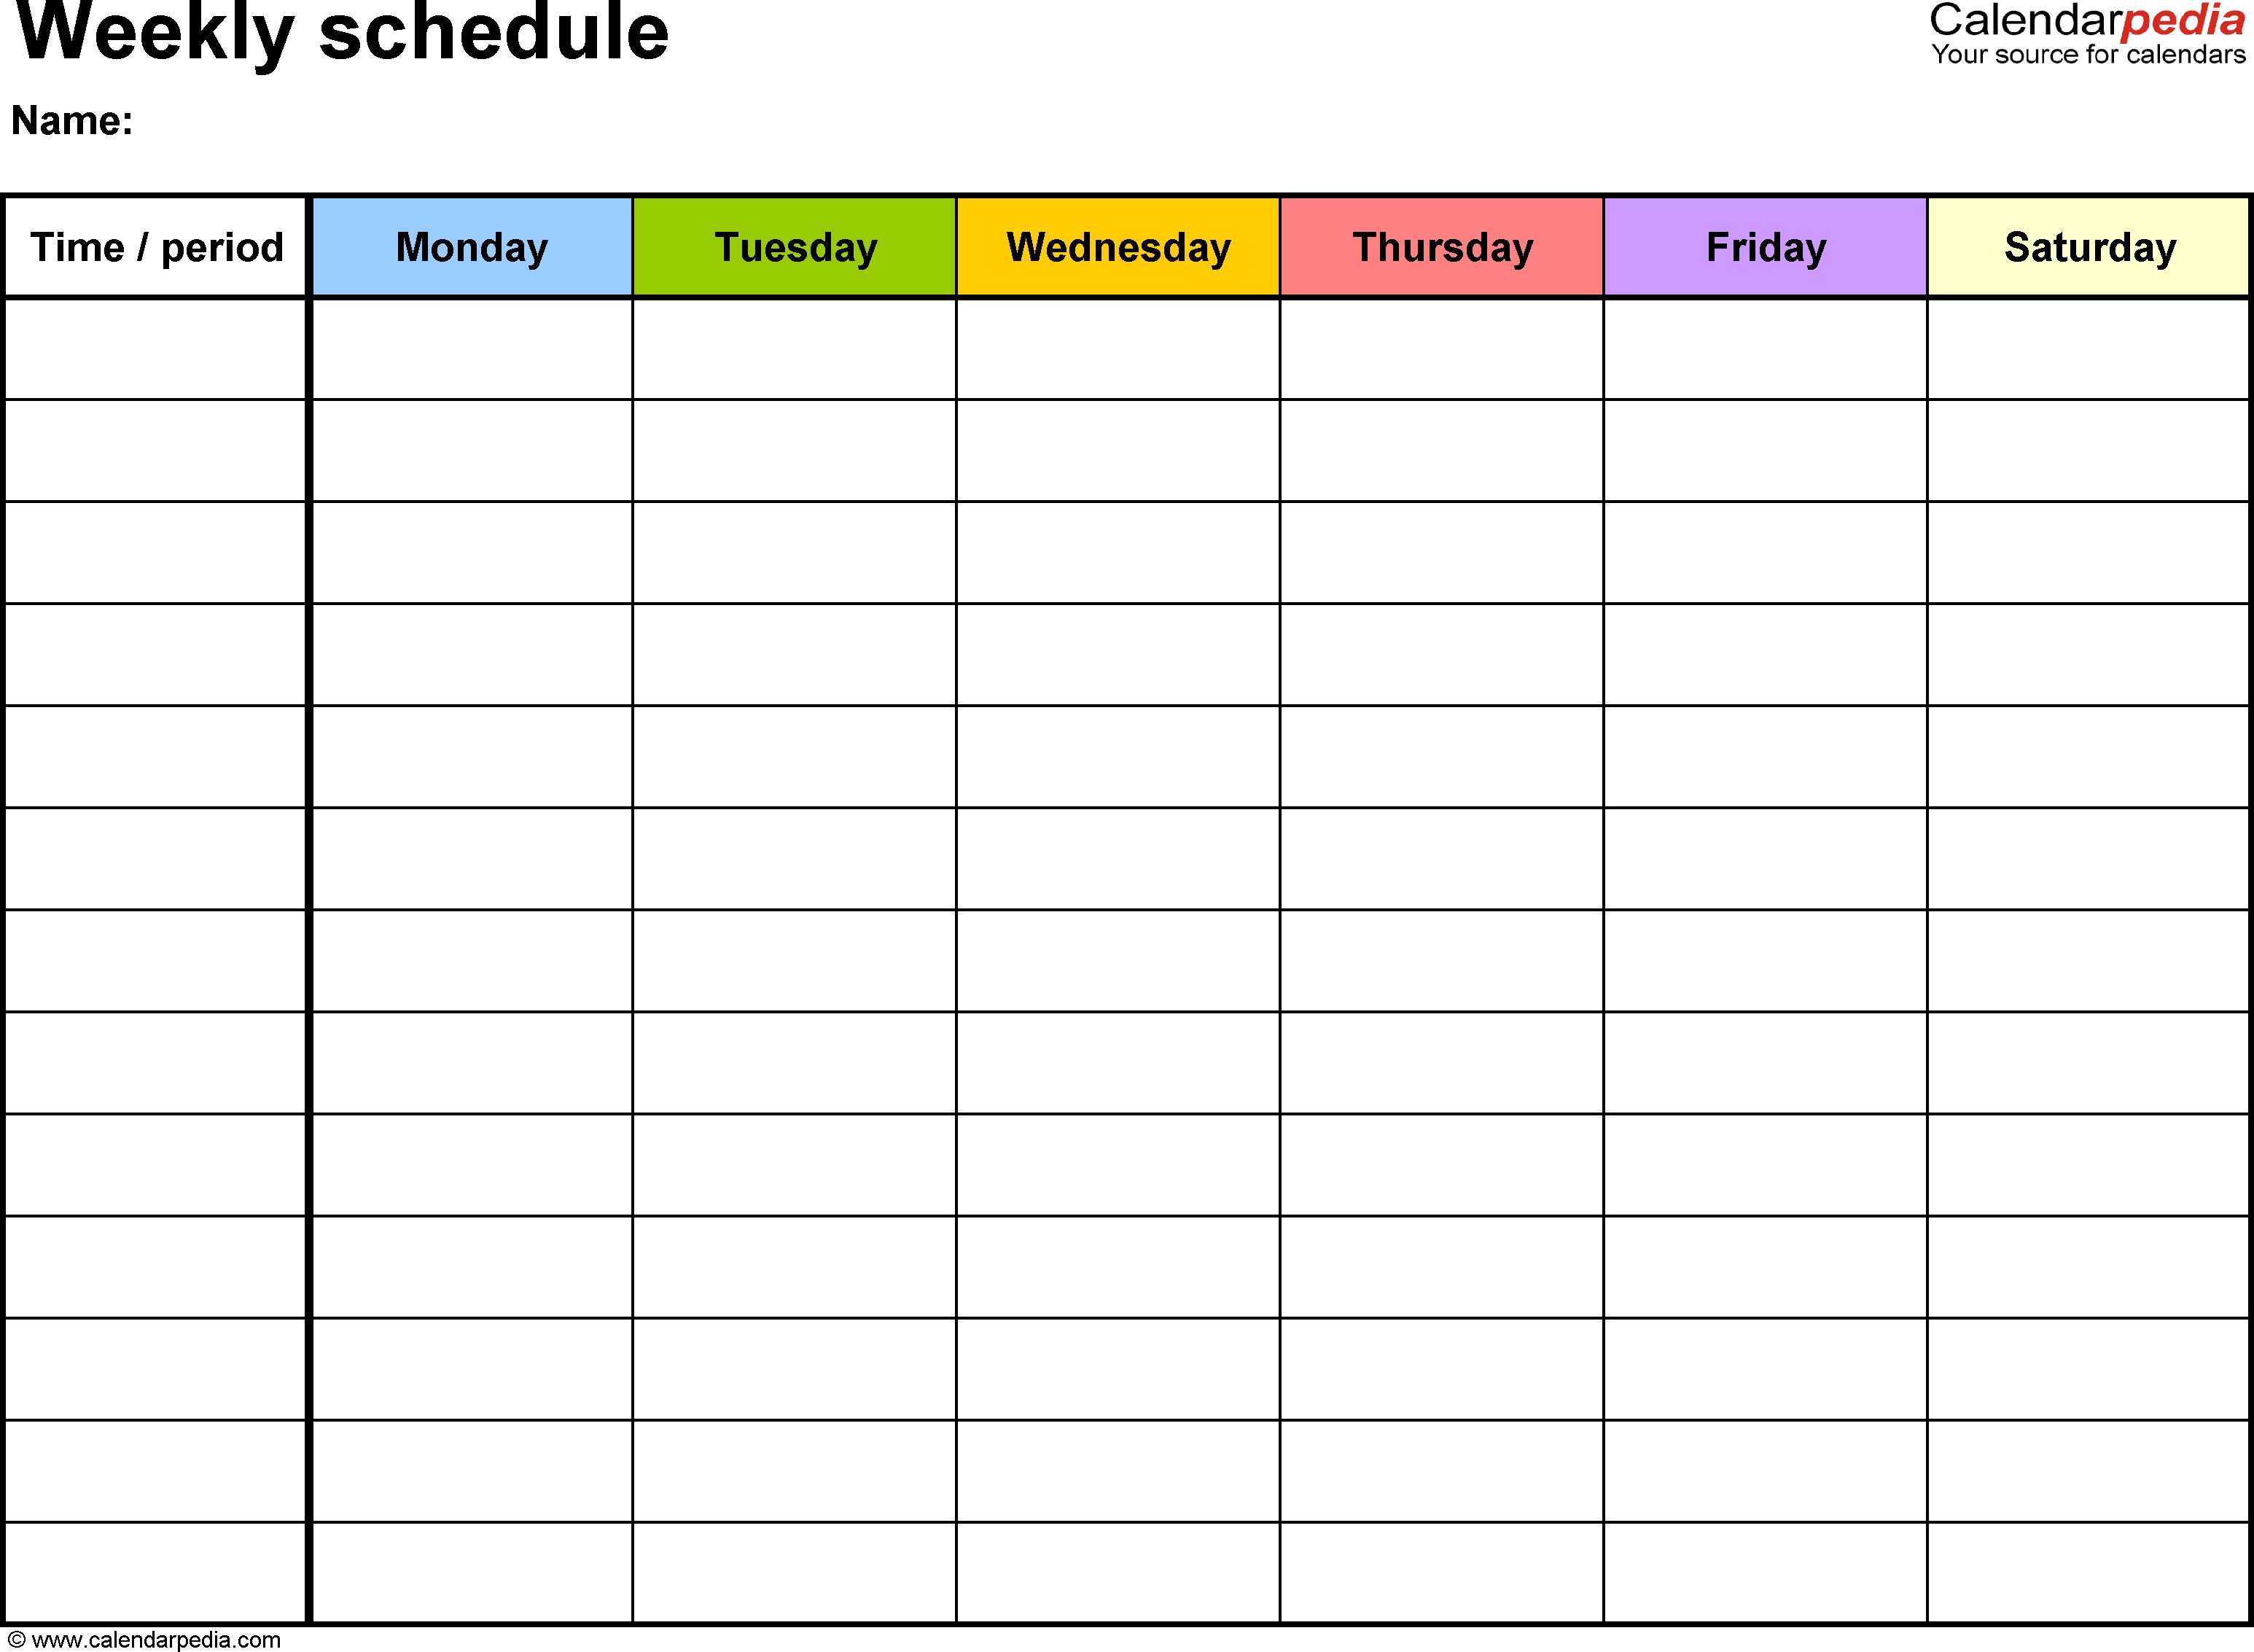 Free Weekly Schedule Templates For Word - 18 Templates  7 Days Weekly Planner Word Template